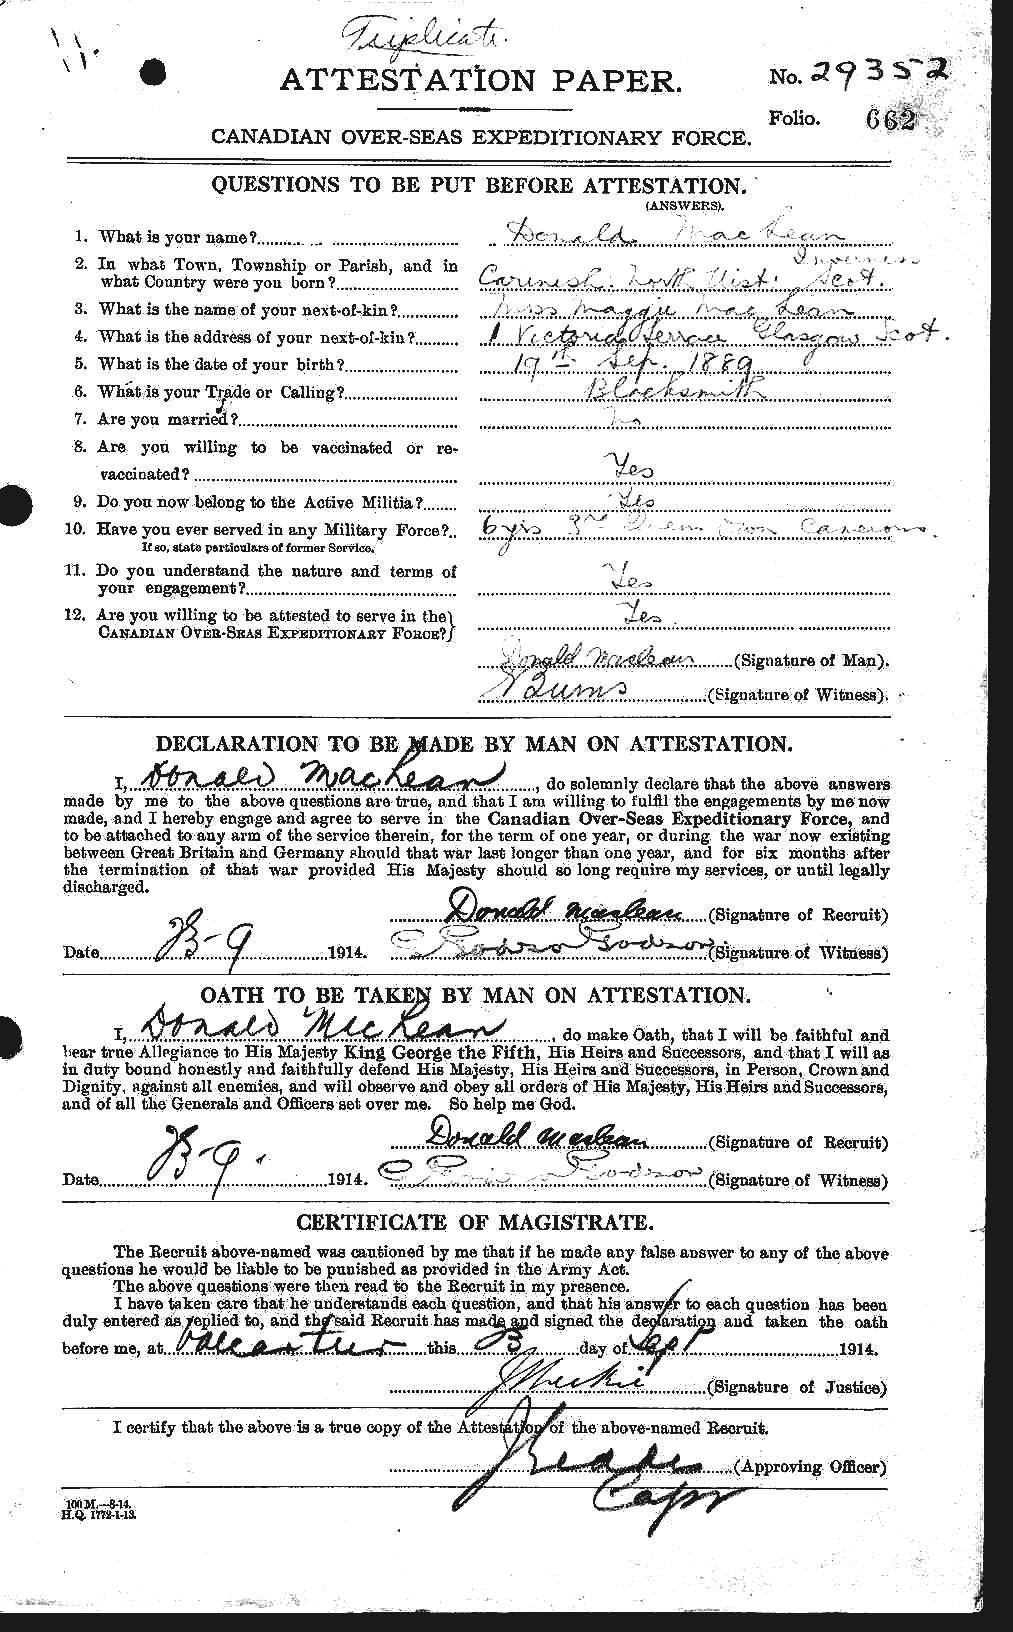 Personnel Records of the First World War - CEF 540103a